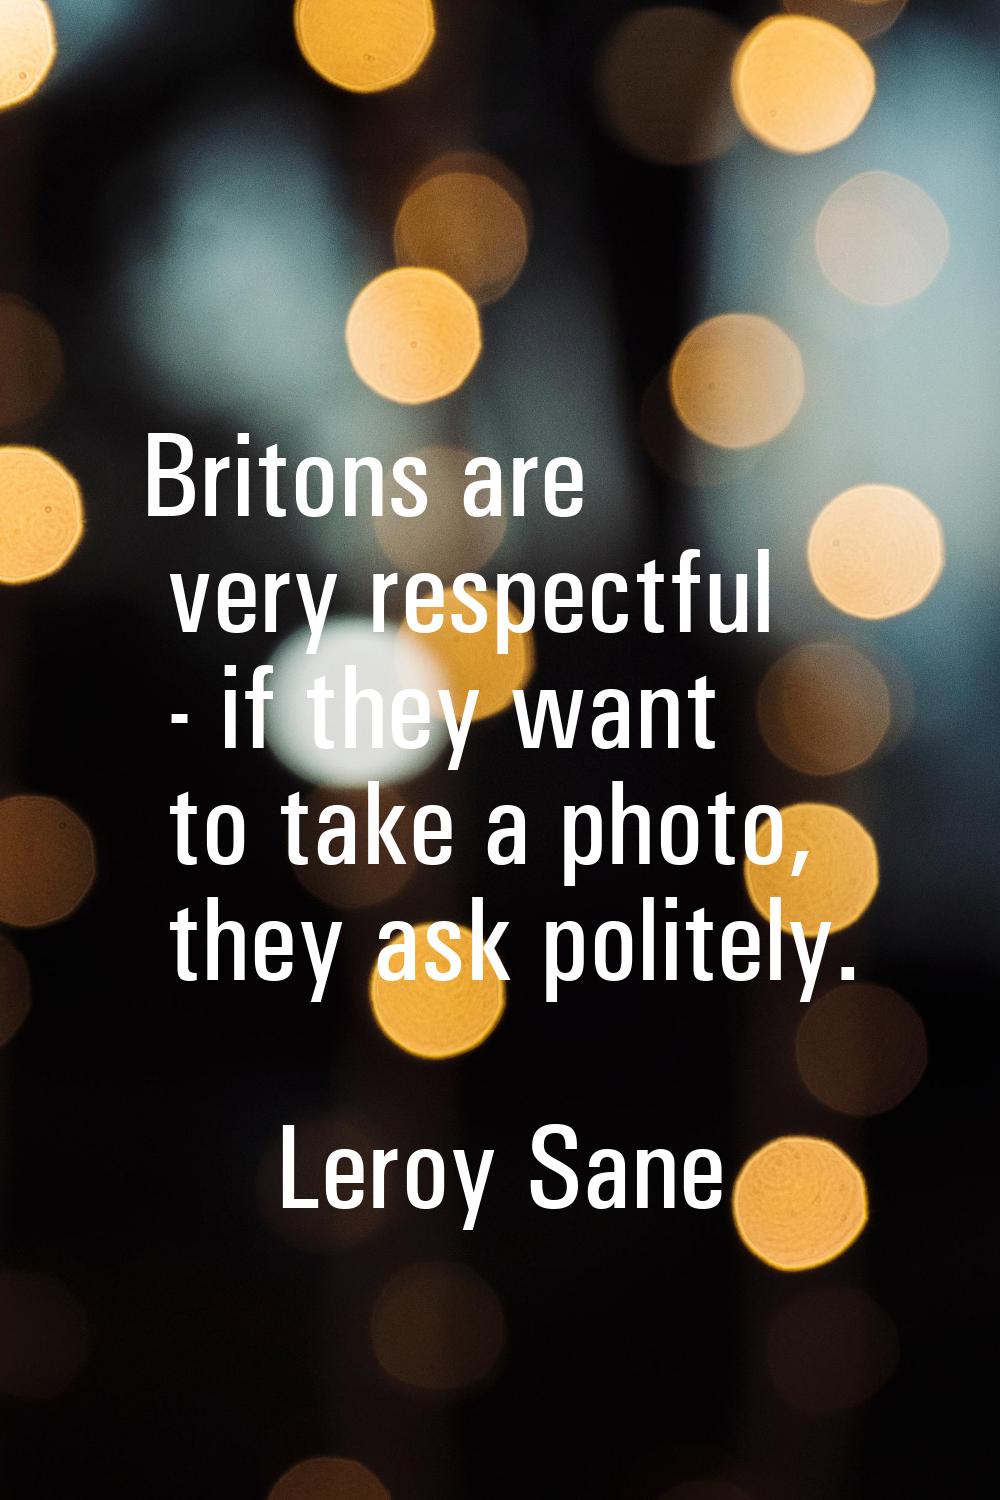 Britons are very respectful - if they want to take a photo, they ask politely.